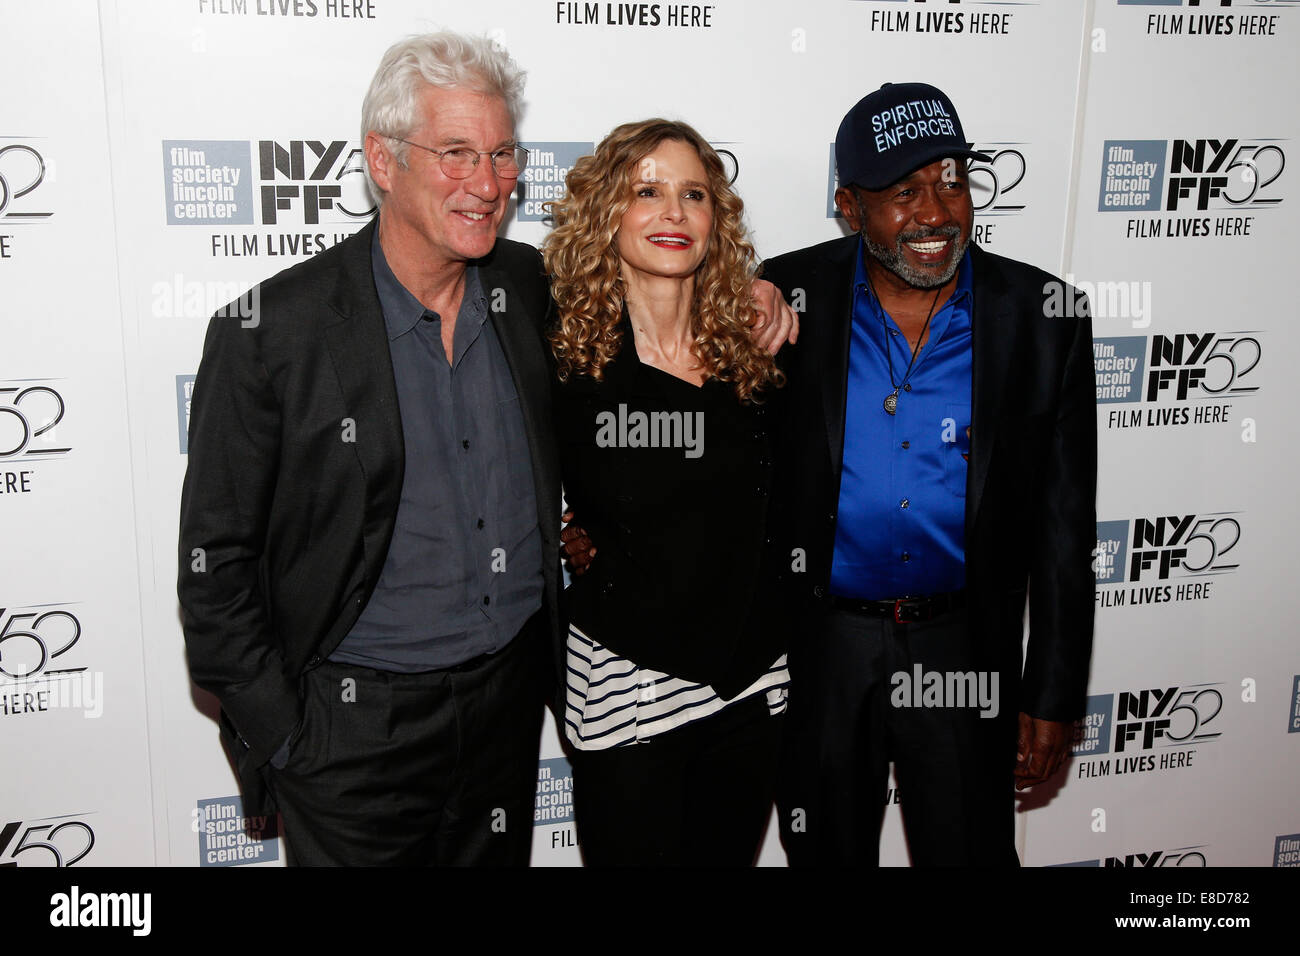 New York, USA. 5th October, 2014. (L-R) Actors Richard Gere, Kyra Sedgwick and actor Ben Vereen attend the premiere of 'Time Out of Mind' at the 52nd New York Film Festival at Alice Tully Hall on October 5, 2014 in New York City. Credit:  Debby Wong/Alamy Live News Stock Photo